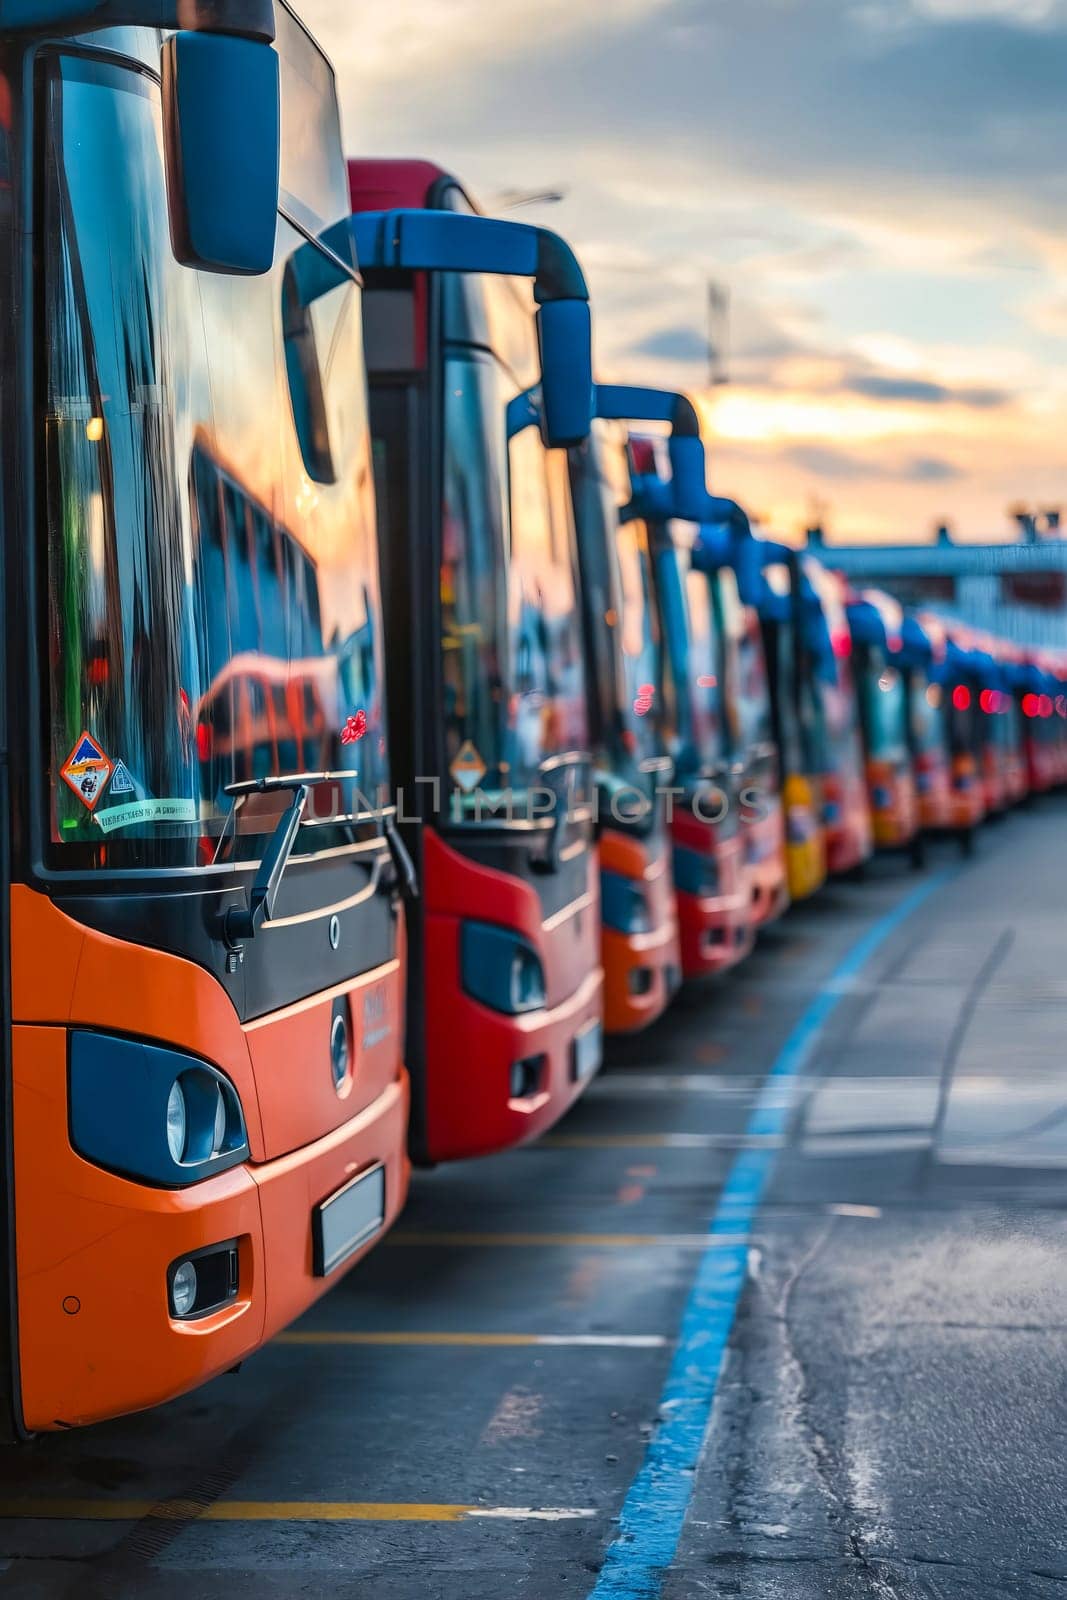 A row of buses are parked in a lot. The buses are all different colors, including orange, red, and yellow. The scene is calm and peaceful, with the buses lined up neatly in rows. Generative AI